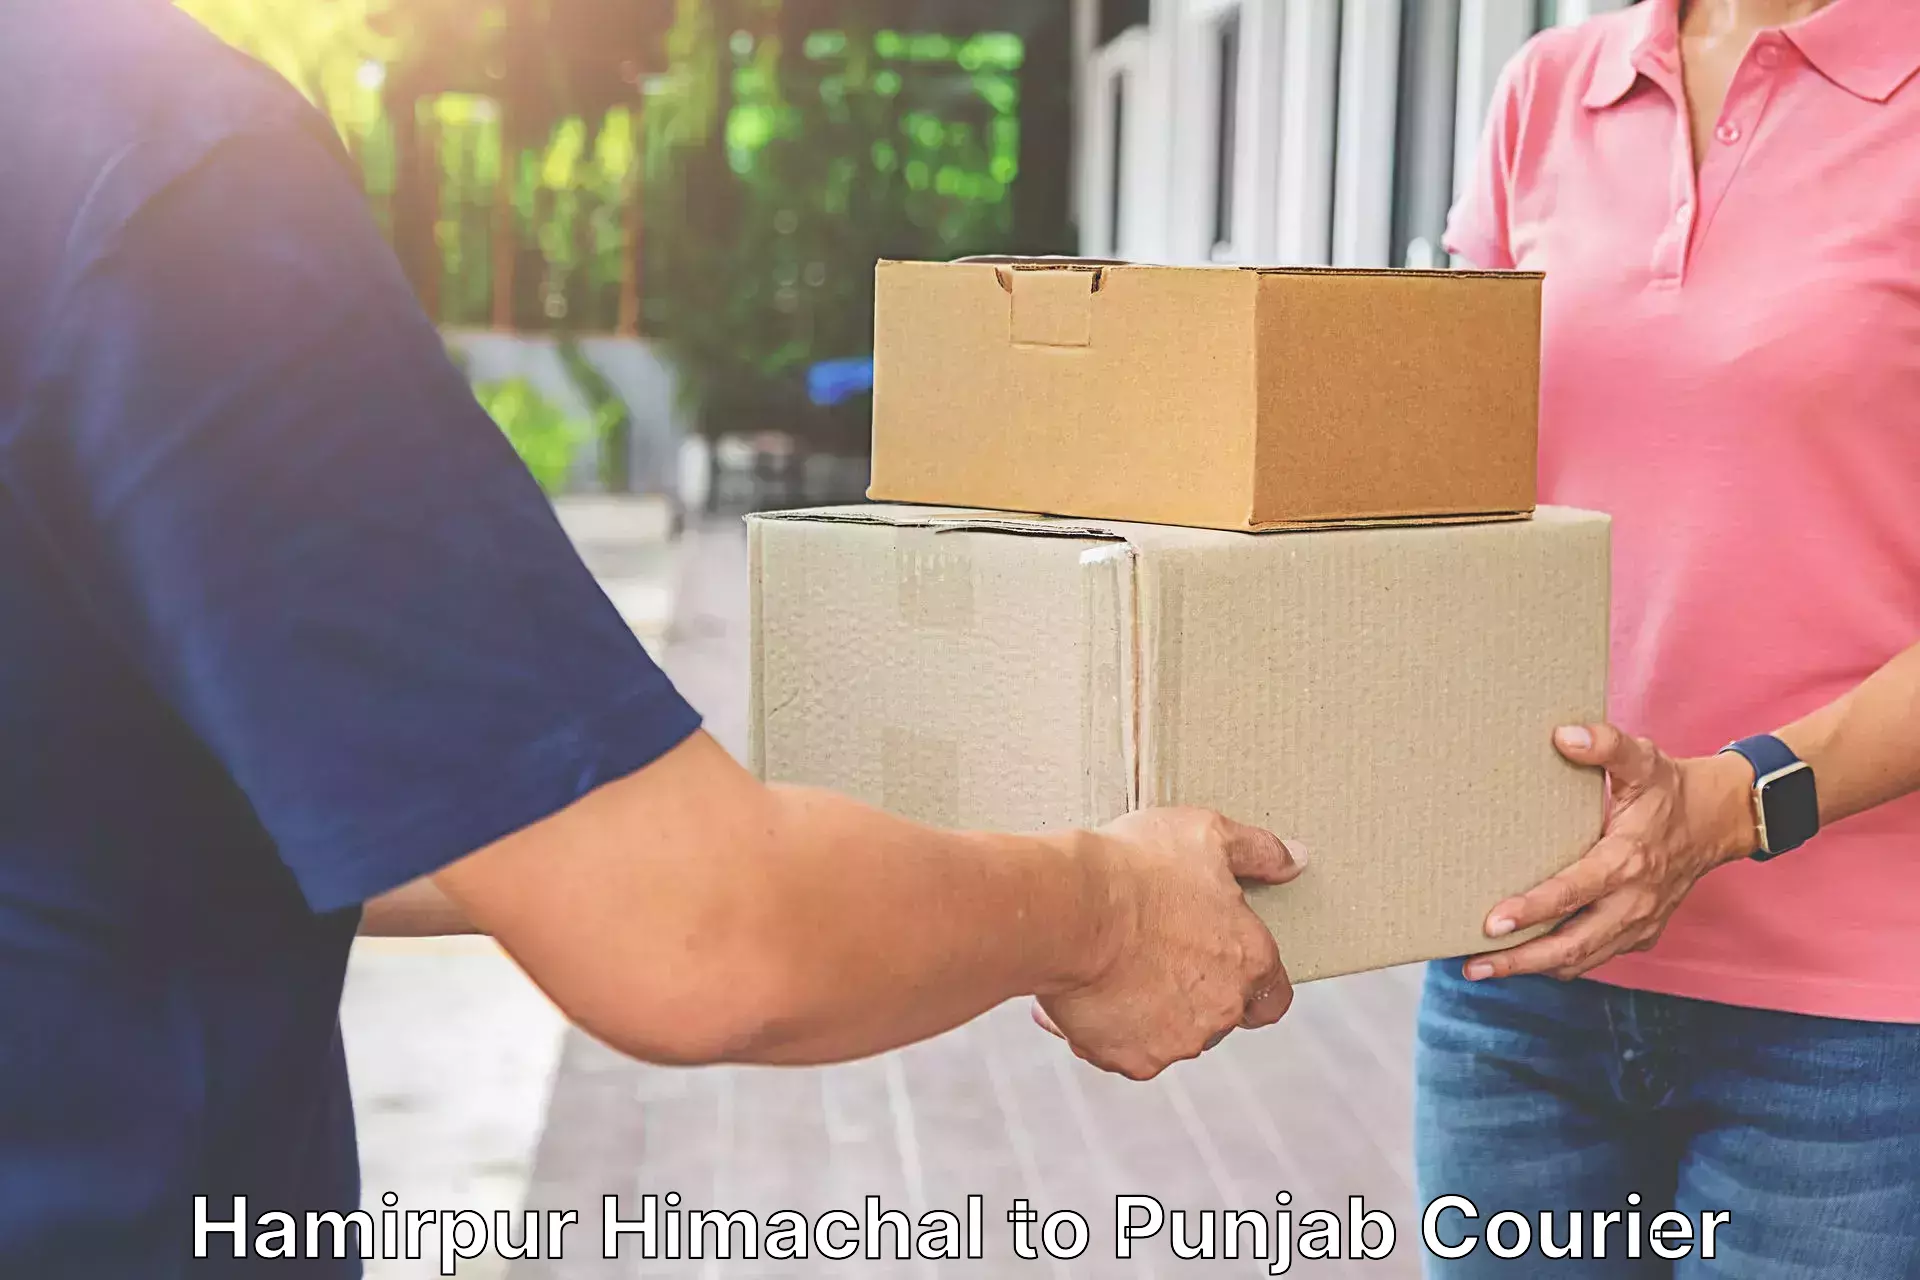 Fast-track shipping solutions Hamirpur Himachal to Firozpur